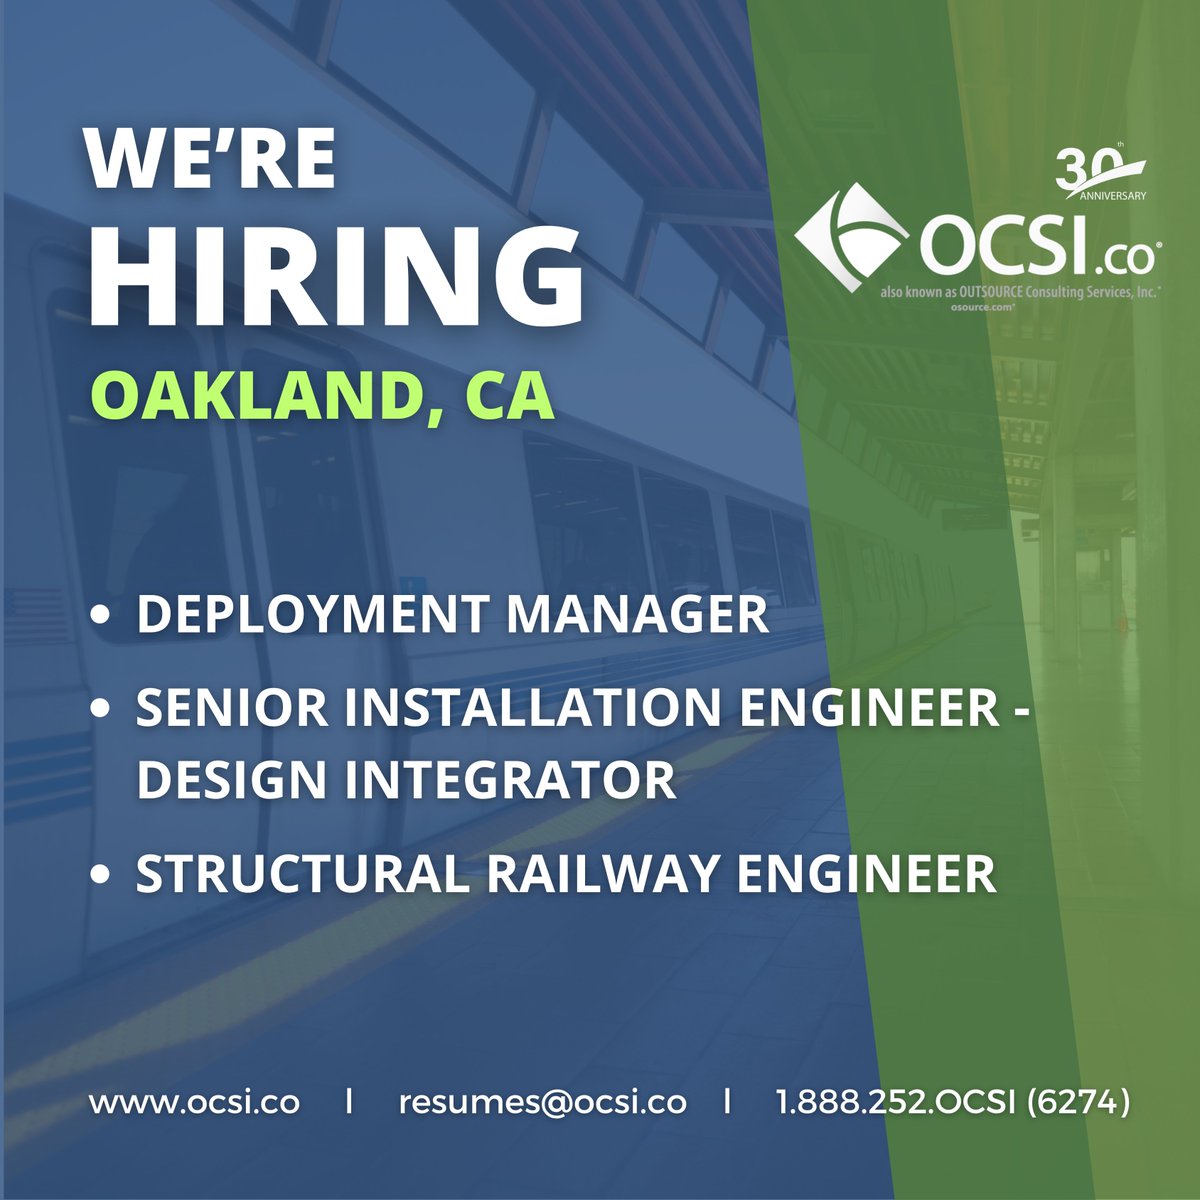 #Hiring Rail Engineering and Management Professionals to support a CBTC project in Oakland, CA. Please visit our website to learn more and apply: ocsi.co/job-seekers/.

#OCSIcoJobs #hiring #OaklandJobs #RailJobs #jobsinrail #structuralengineer #electricalengineeringjobs #Jobs